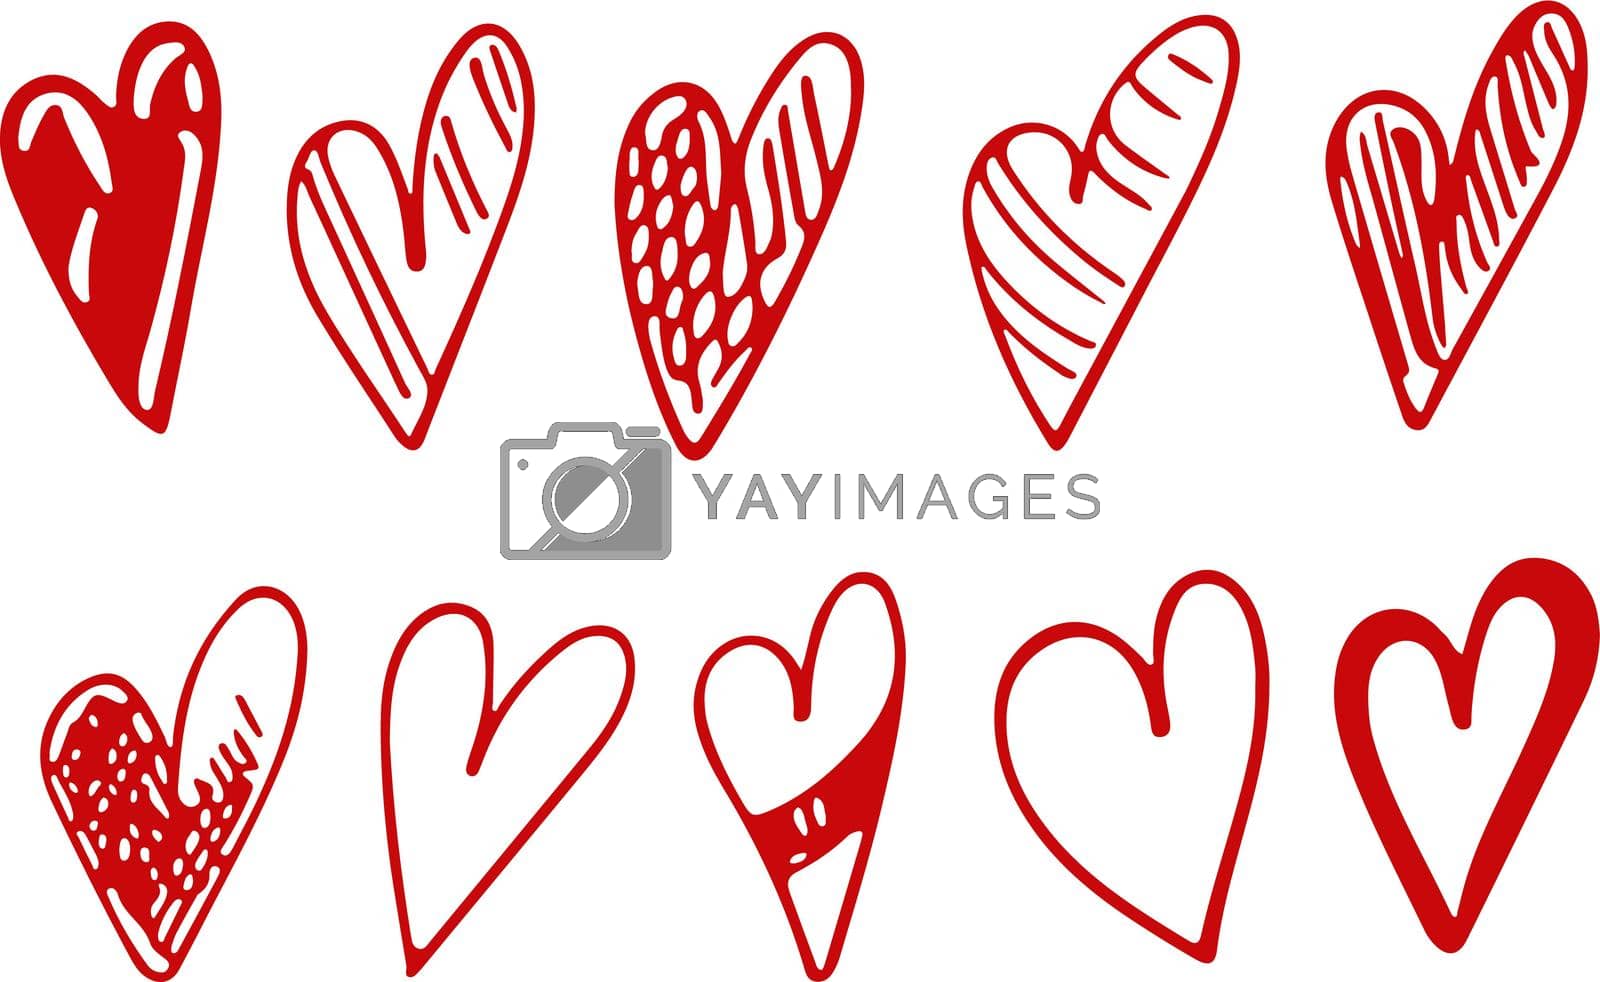 Royalty free image of Collection set of hand drawn red doodle scribble hearts isolated on white background by Voodziavka